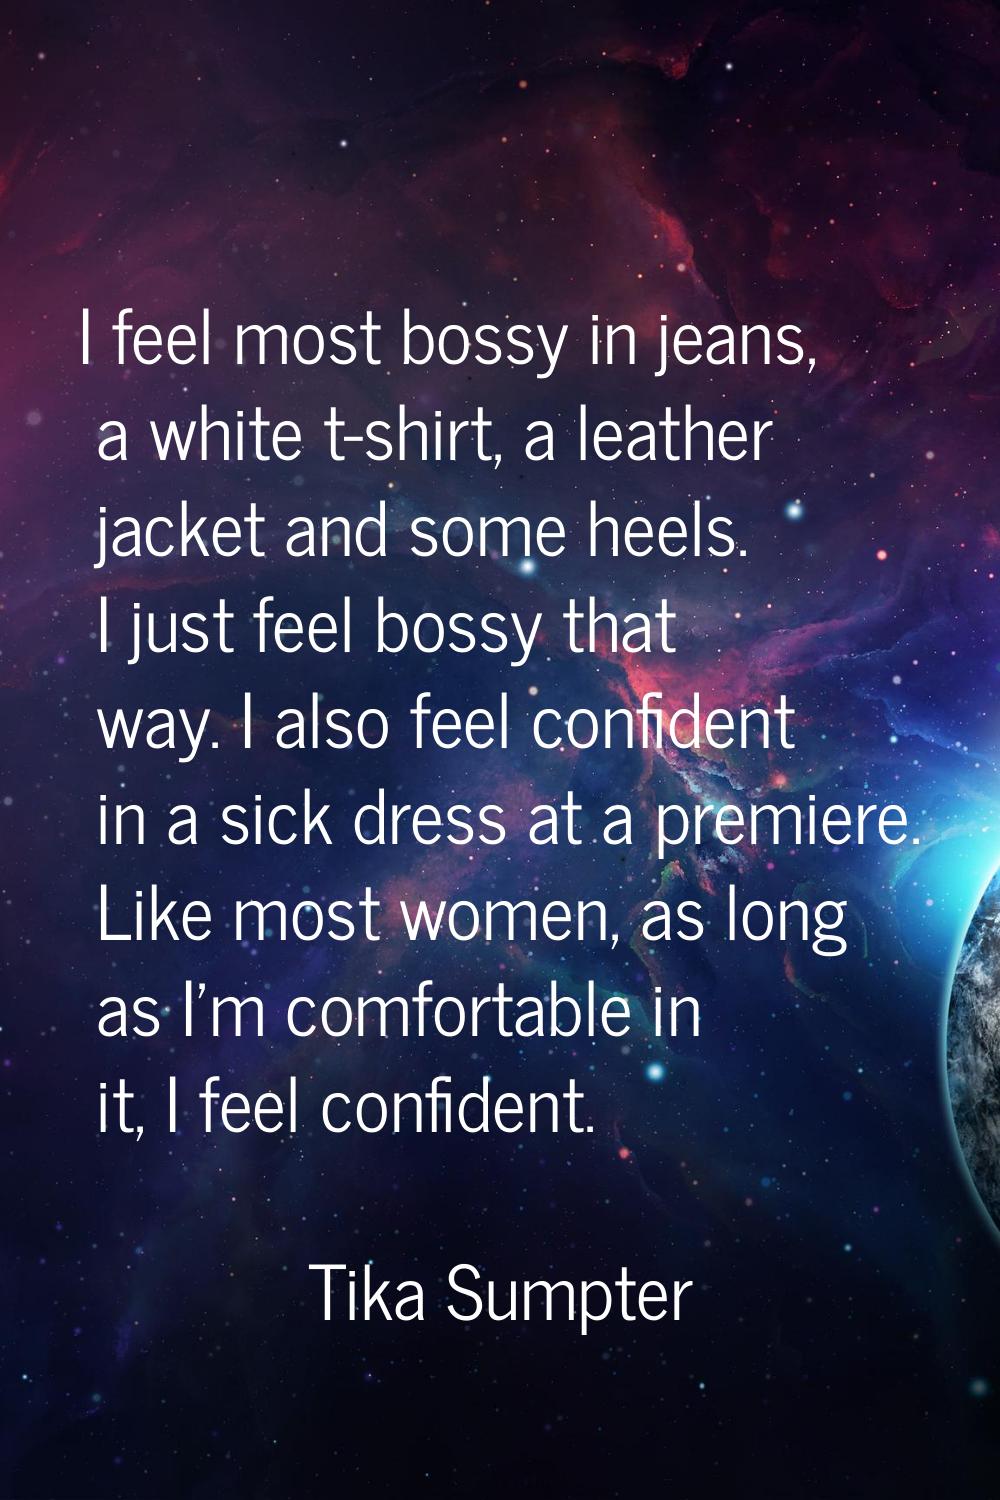 I feel most bossy in jeans, a white t-shirt, a leather jacket and some heels. I just feel bossy tha